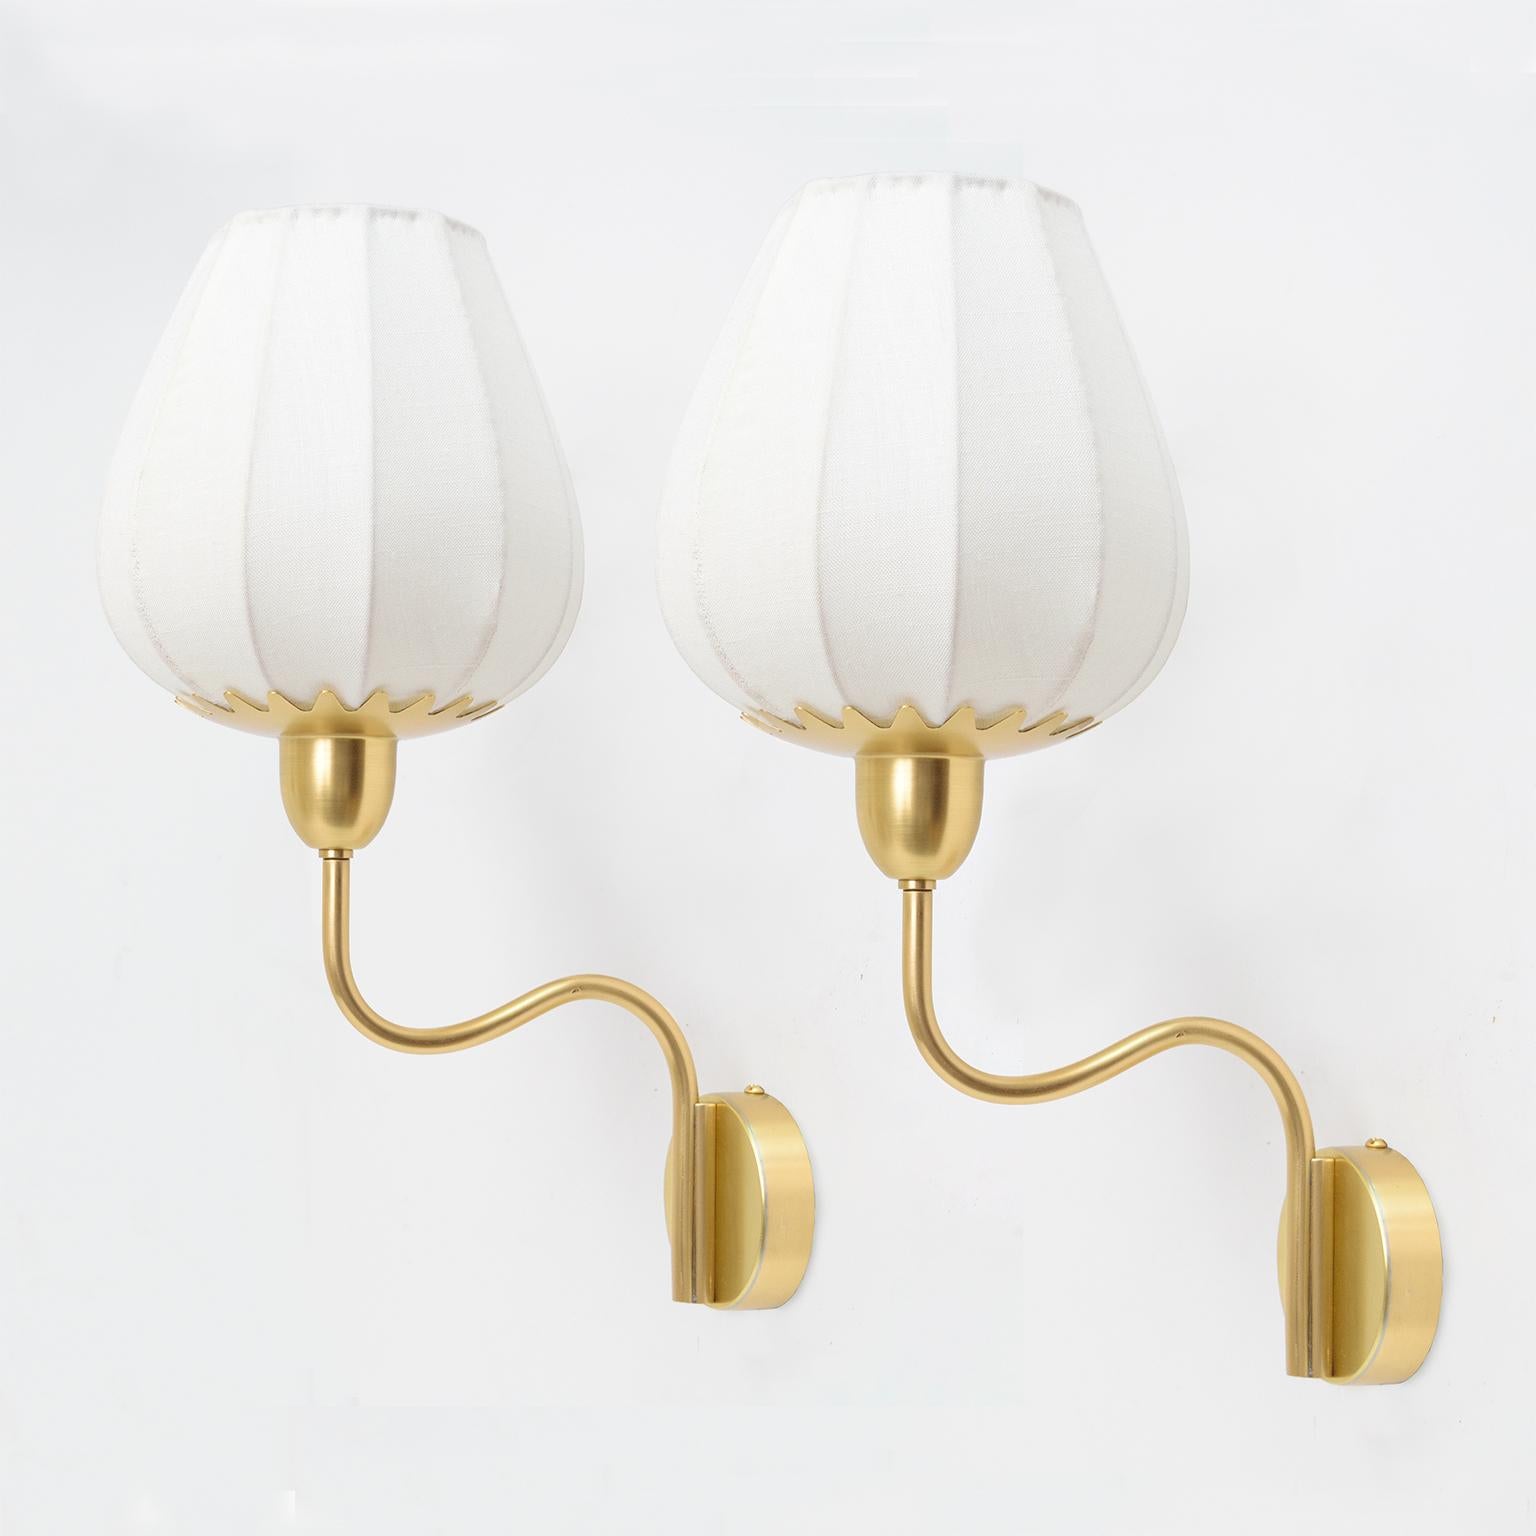 Pair of Scandinavian Modern polished brass single arm sconces with newly covered linen ribbed shades. Each scones has been fully restored and wired with a single standard base socket for use in USA. 

Measures: Height 16“ shade diameter 7“ depth